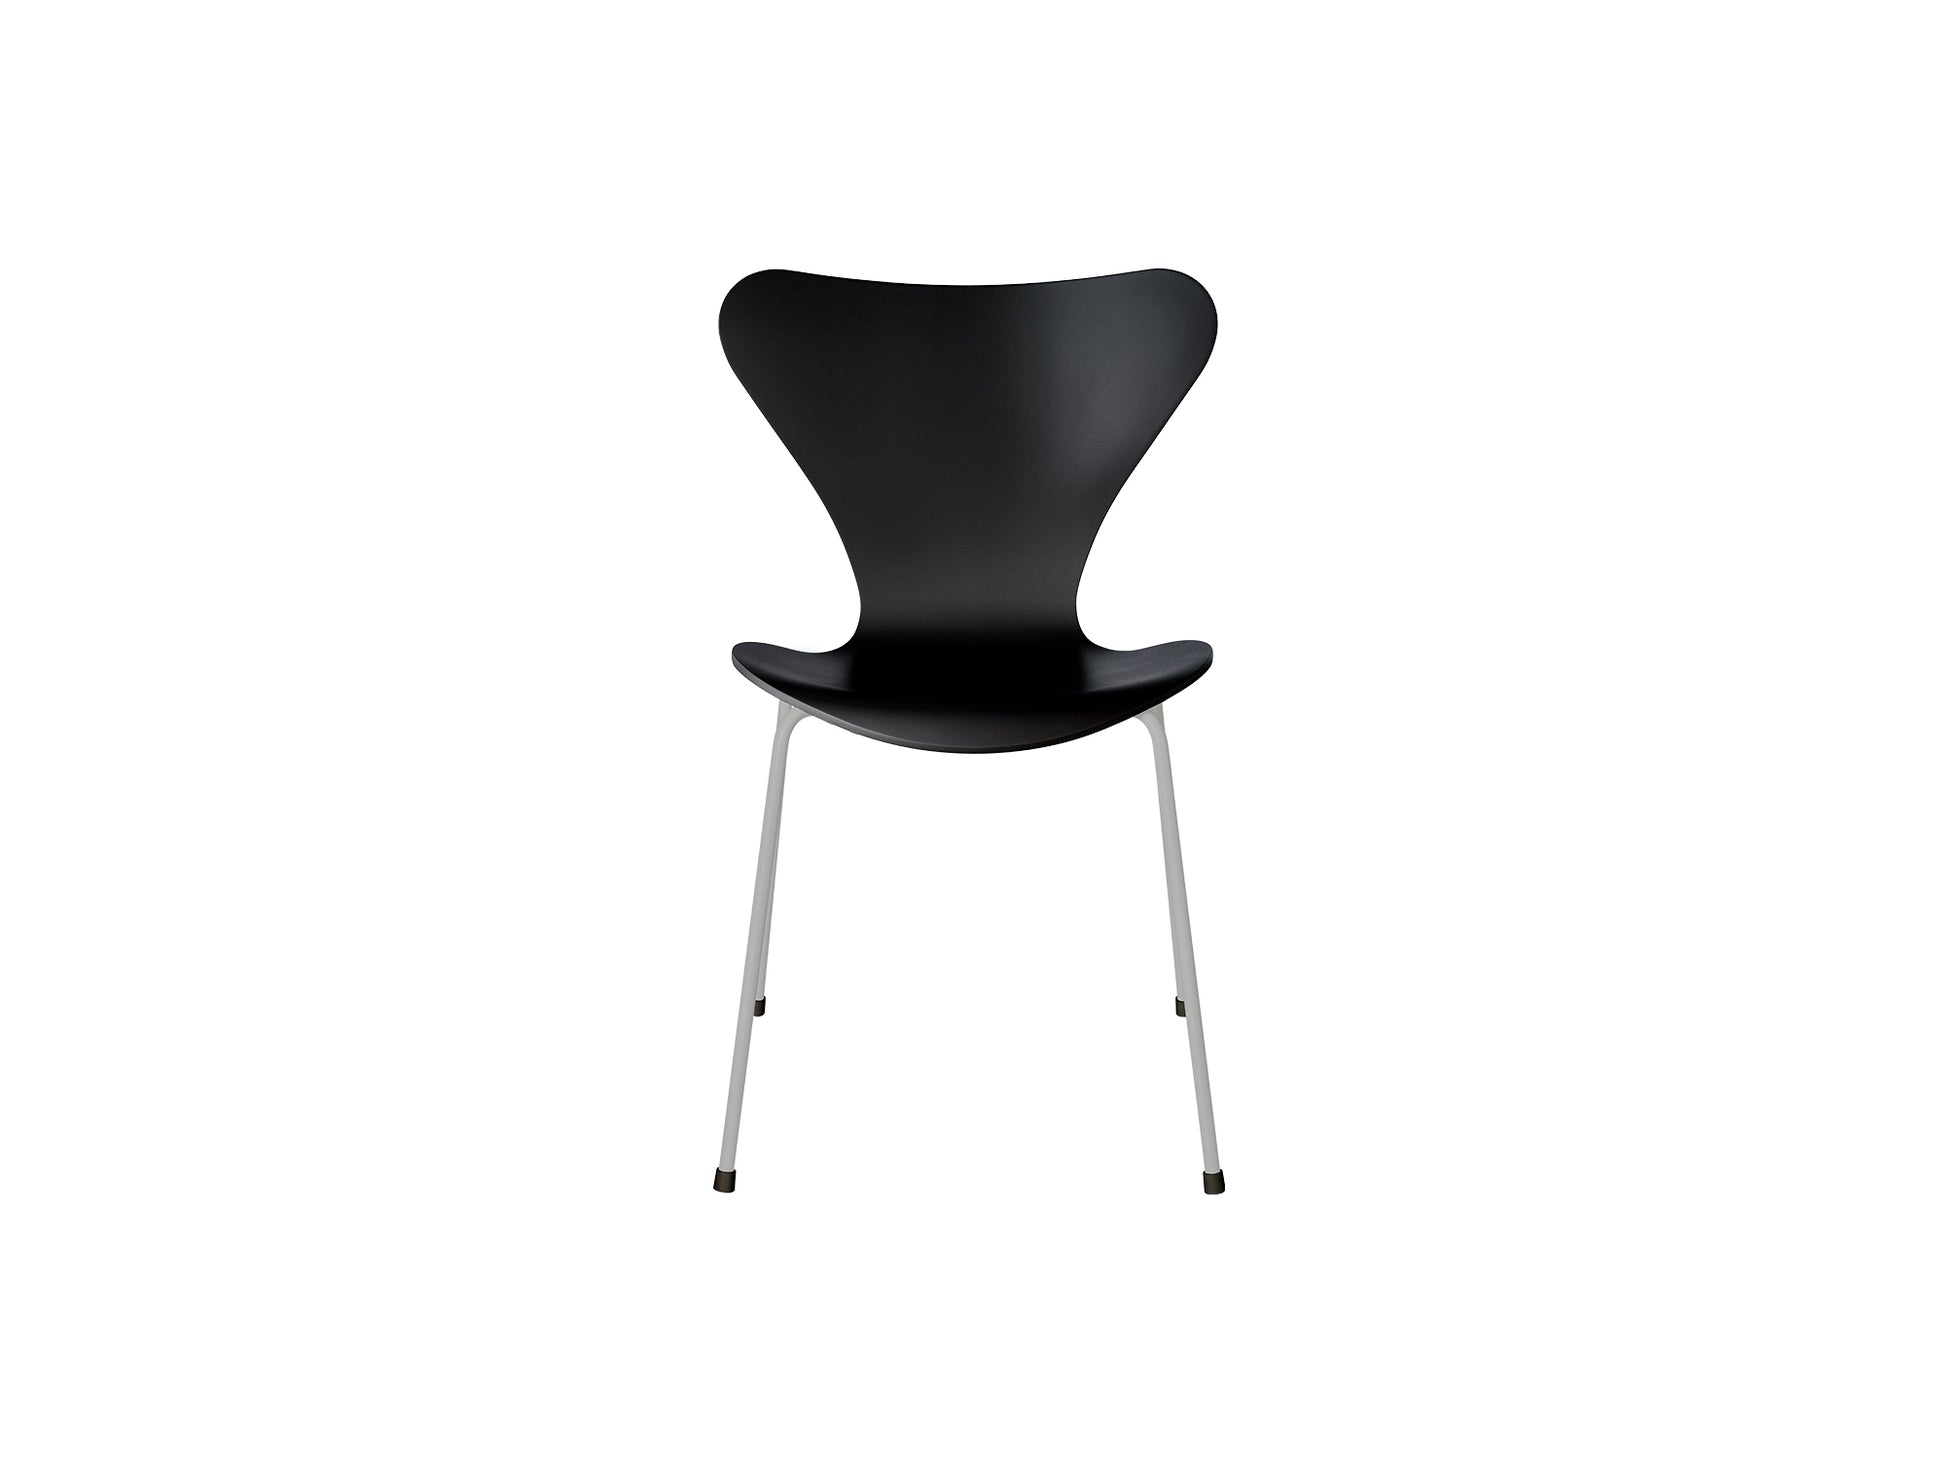 Series 7™ 3107 Dining Chair by Fritz Hansen - Black Lacquered Veneer Shell / Nine Grey Steel